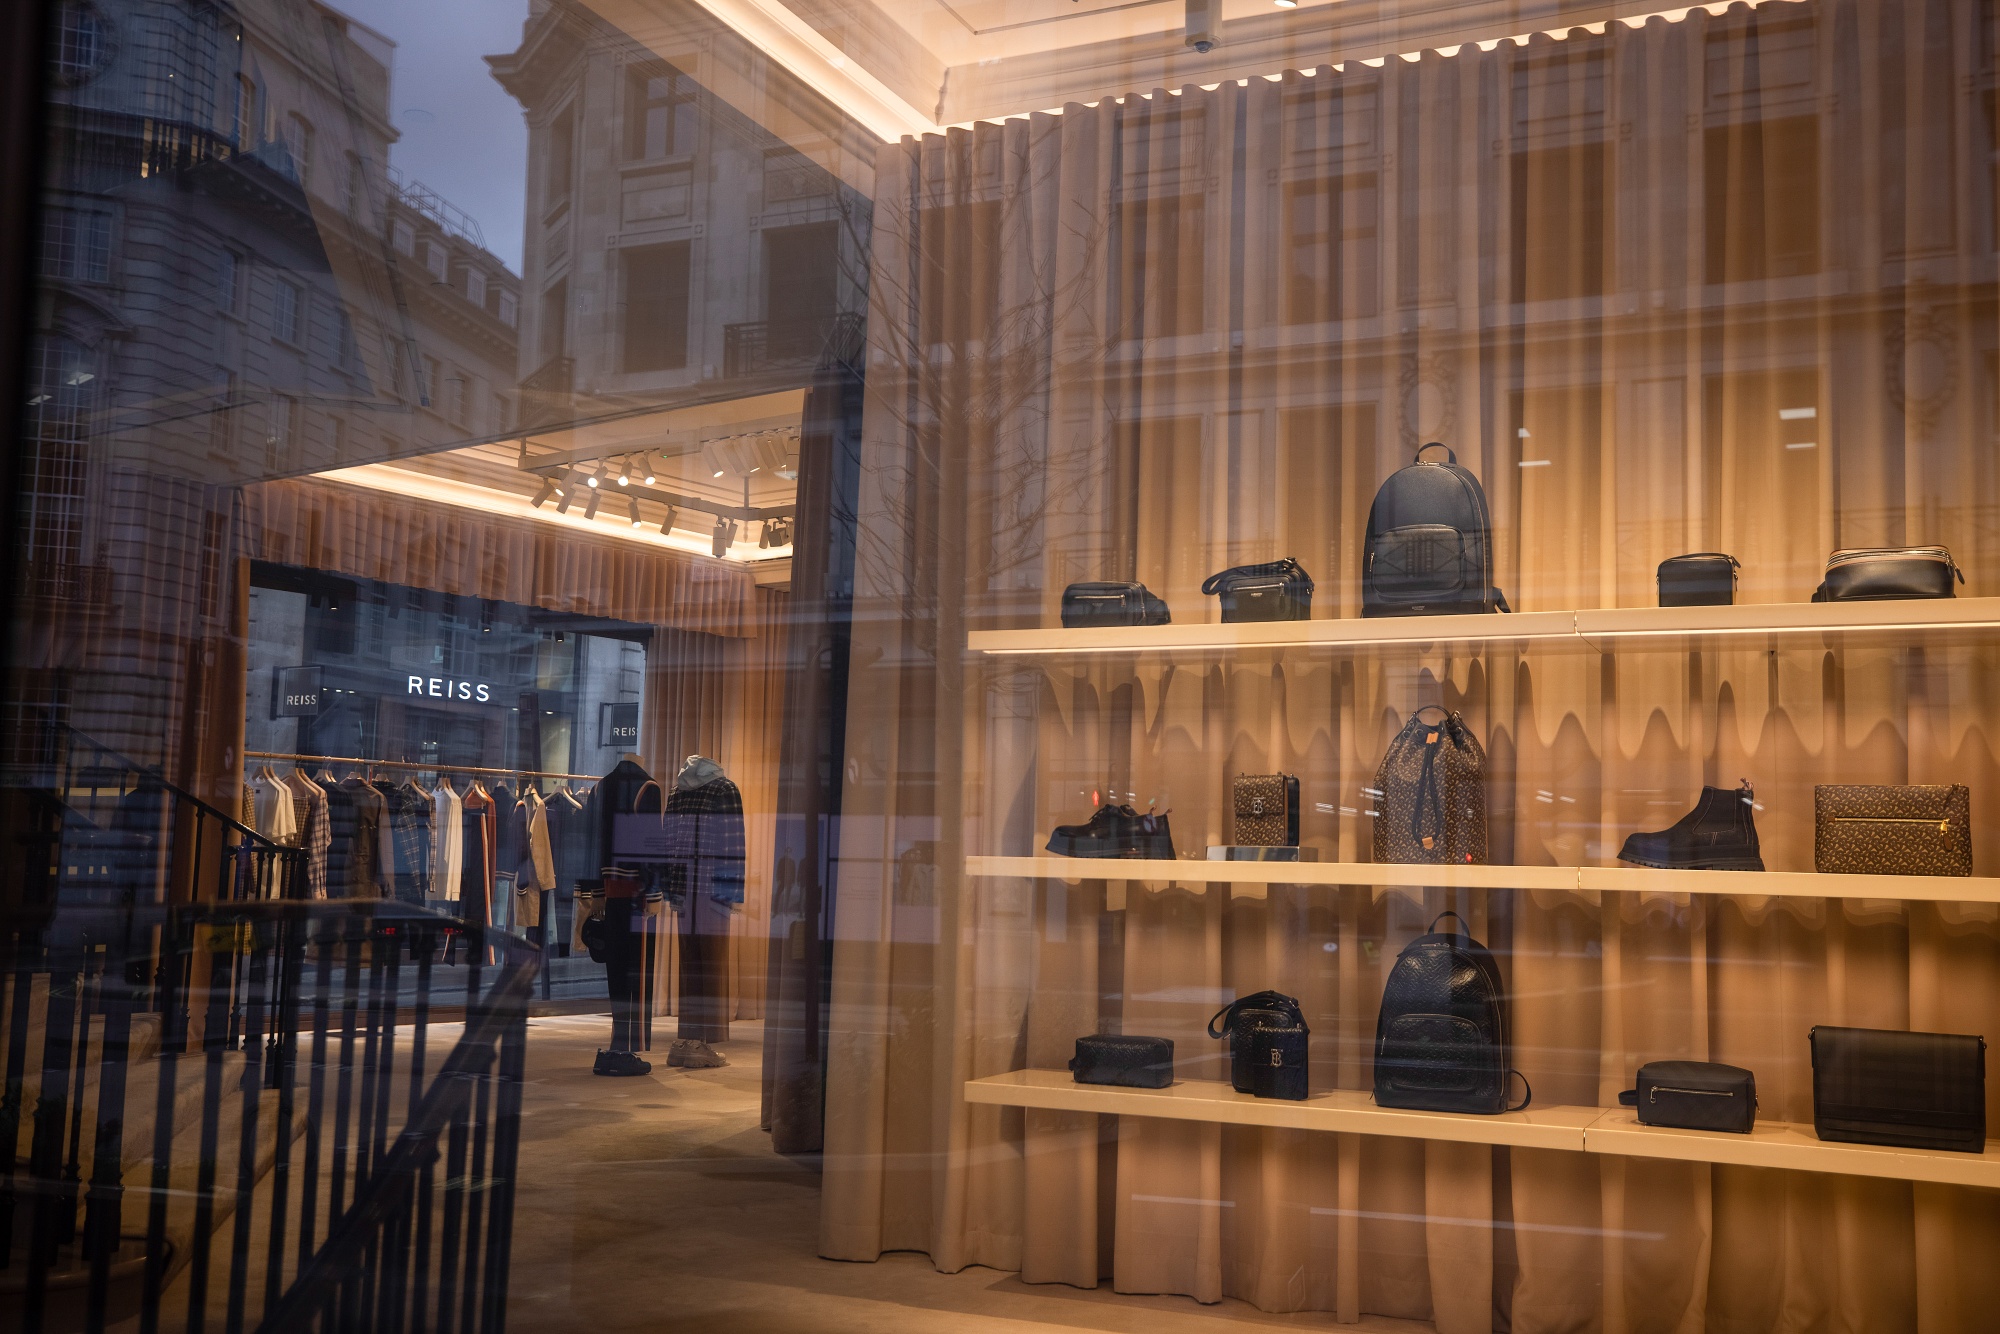 Chanel Makes Punchy Bid for Flagship Site on London's New Bond Street